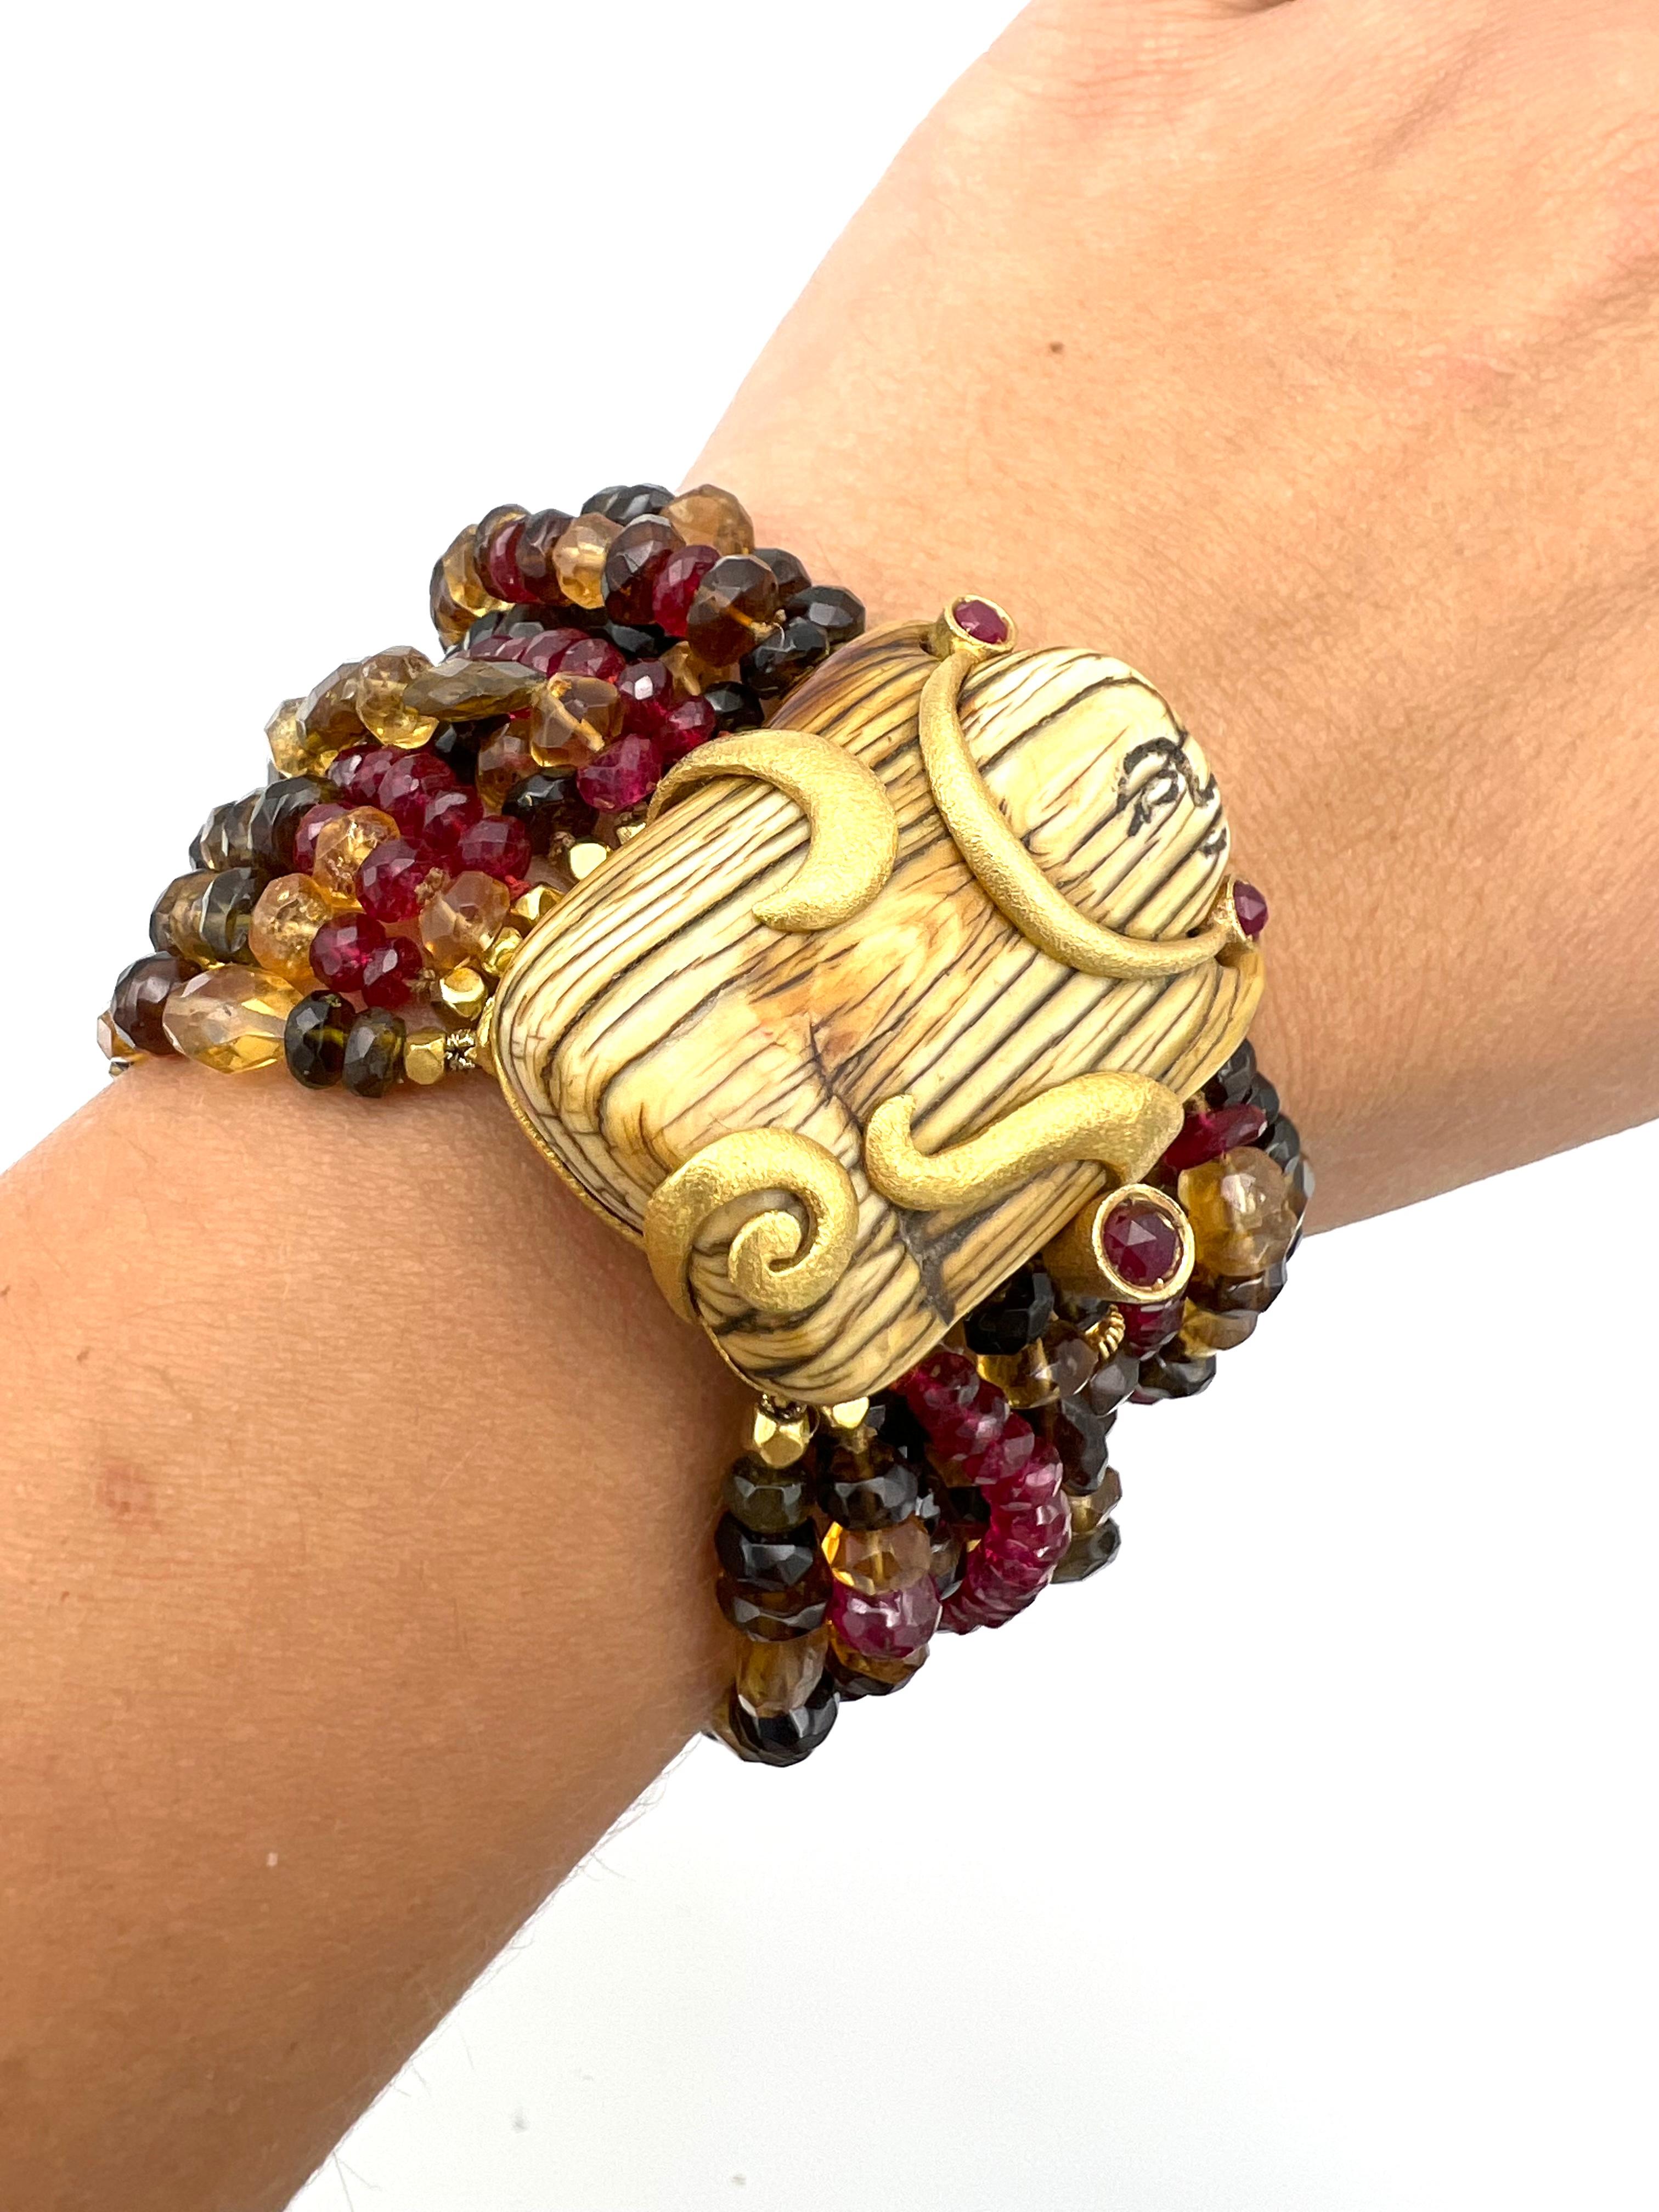 Paola Ferro Yellow Gold and Gemstone Bead Bracelet For Sale 3